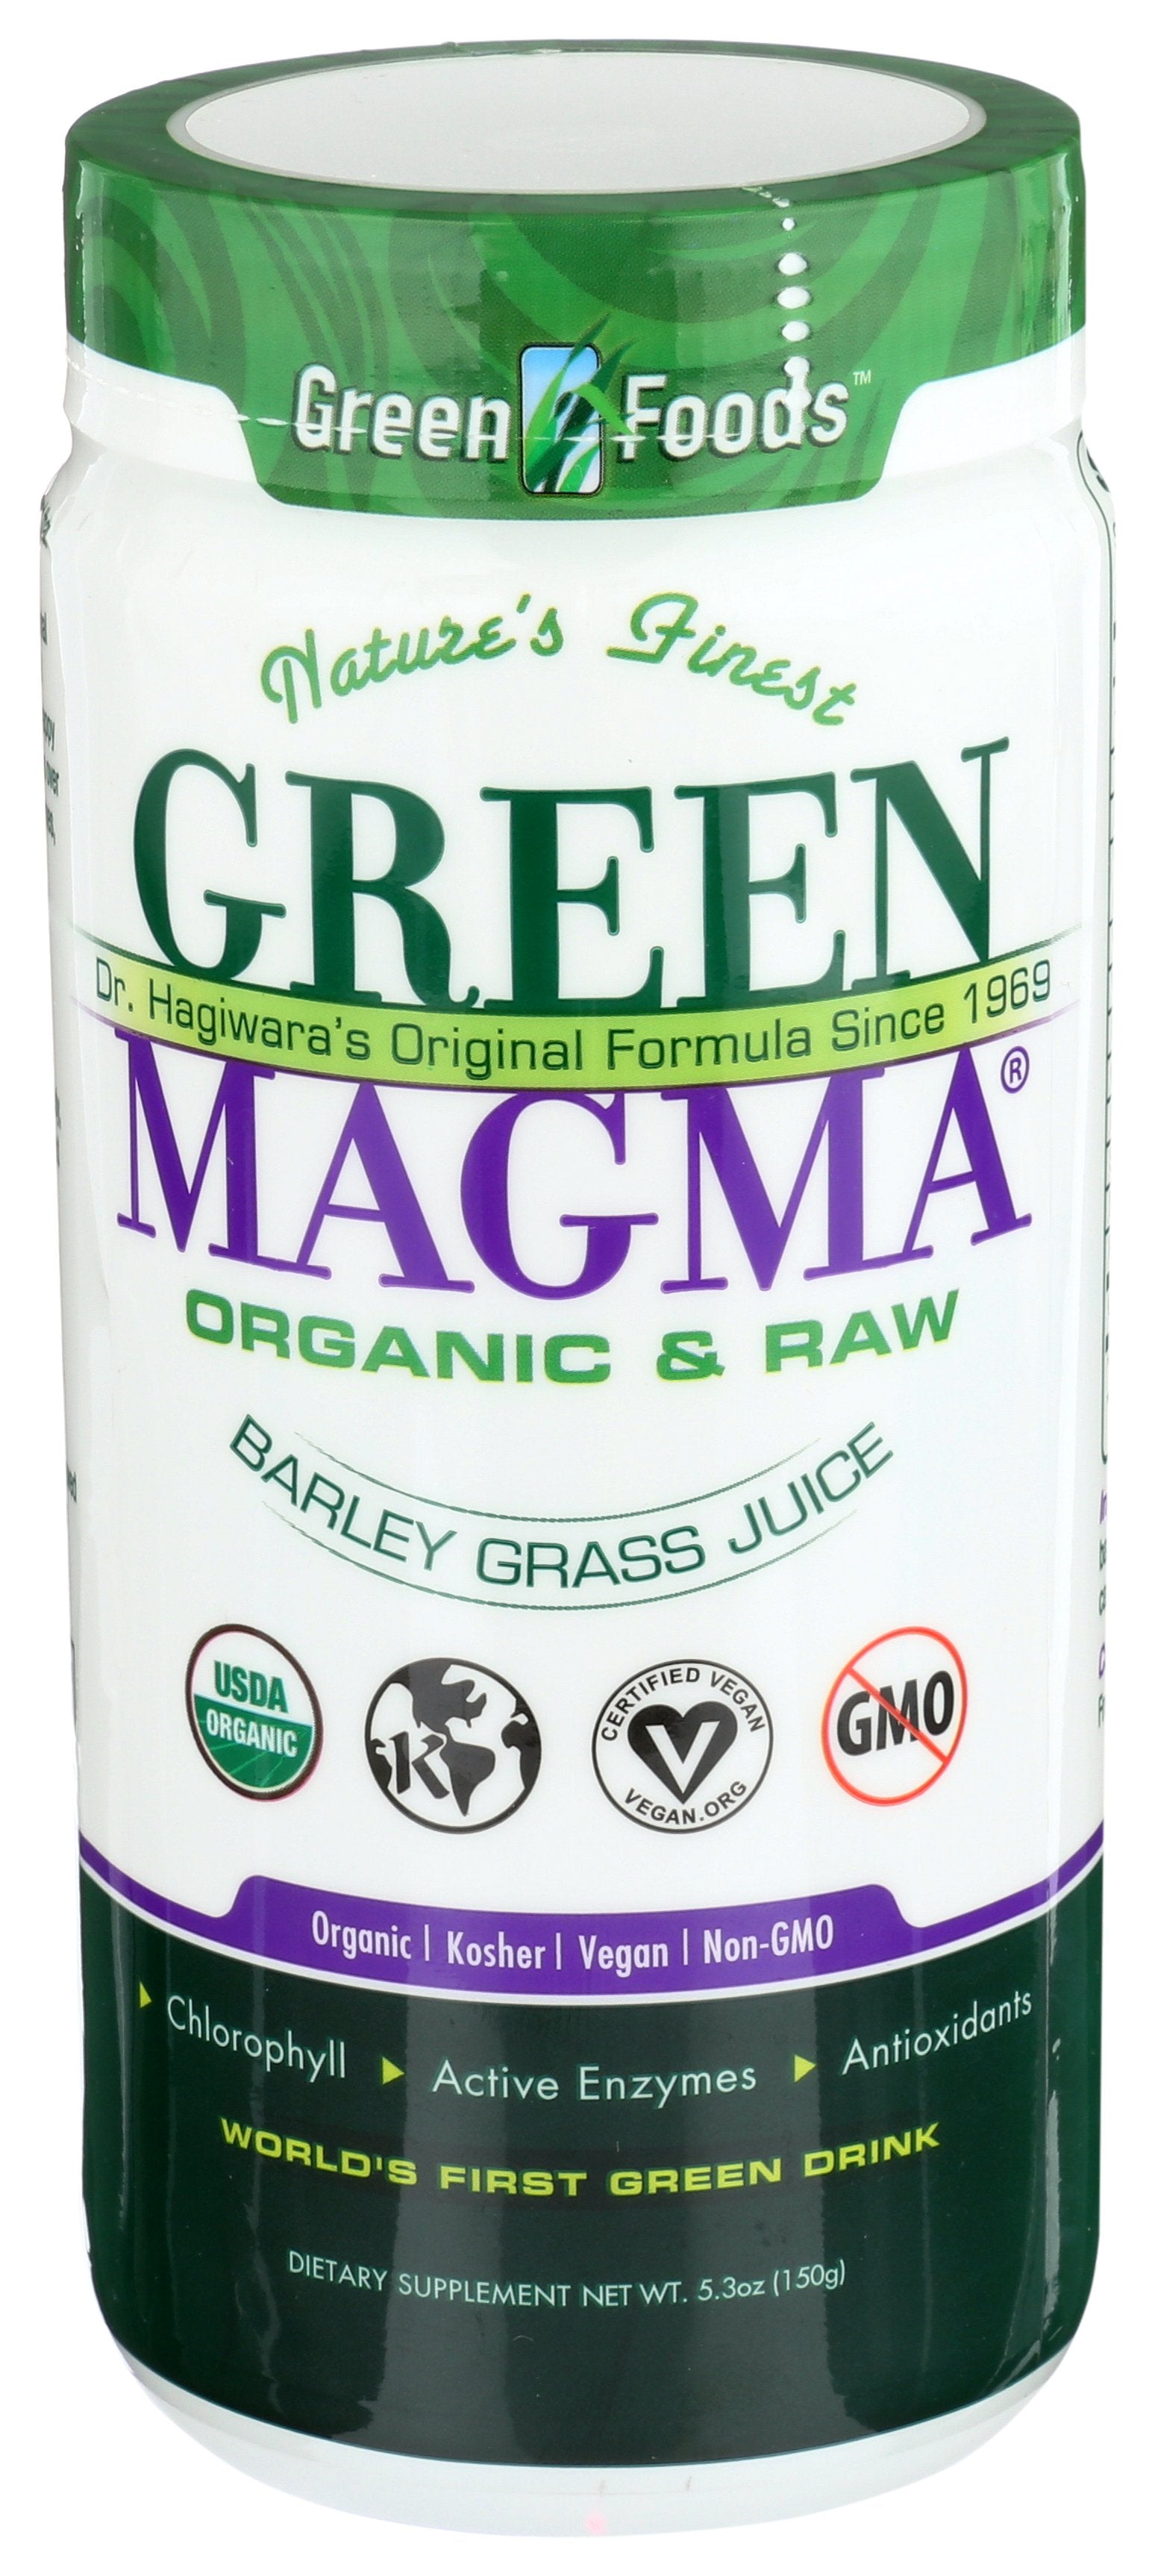 GREEN FOODS GREEN MAGMA USA - Case of 3